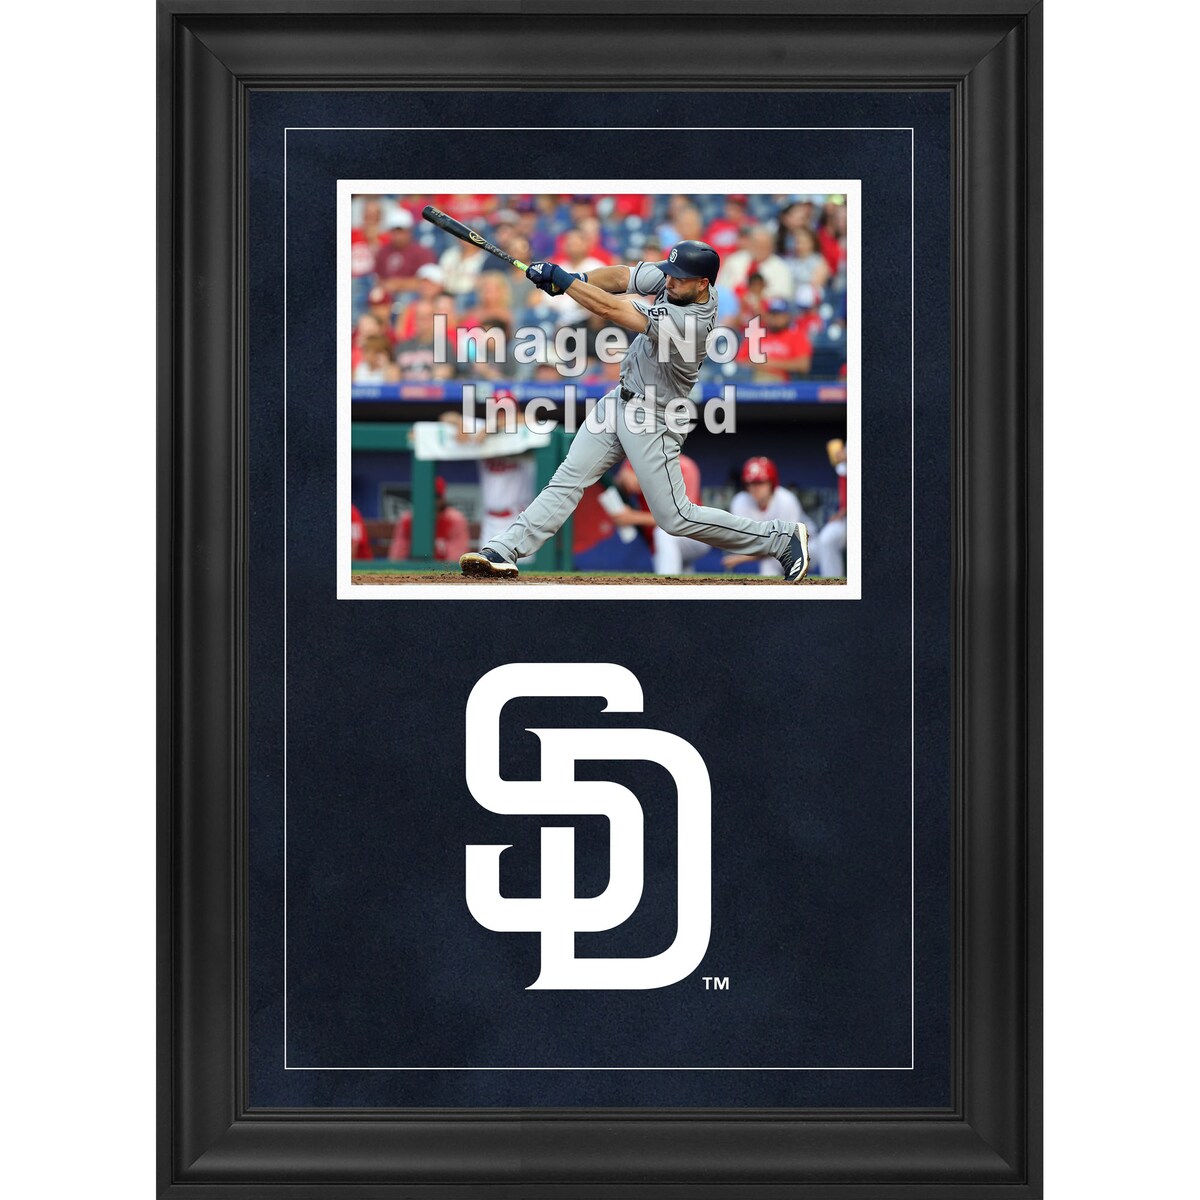 Each black wood frame is double matted in suede and includes a laser cut team logo that has been individually assembled. This collectible is officially licensed by the Major League Baseball. Please note that this photo frame is for horizontal frames only. The frame measures 16'' x 26'' x 1''.Officially licensedMemorabilia sold seperatelyMade in the USABrand: Fanatics AuthenticMemorabilia sold separately